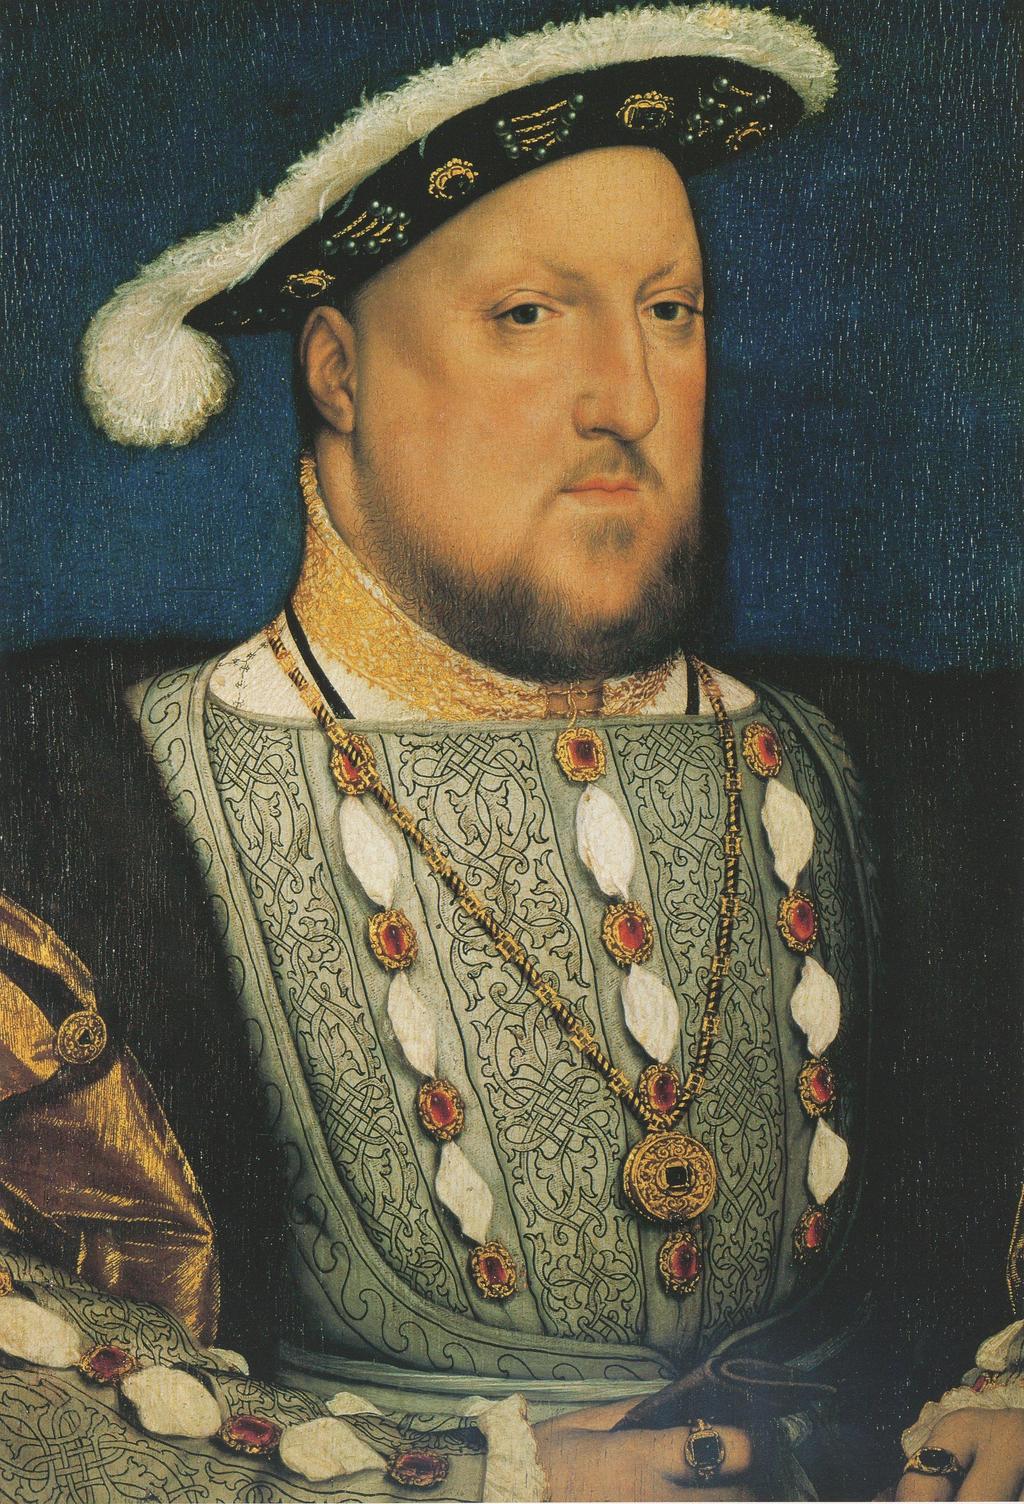 Henry VIII of England Hans Holbein the Younger c.1536-7 I've included this image of Henry VIII mainly to show the high necked shirt that he is wearing.